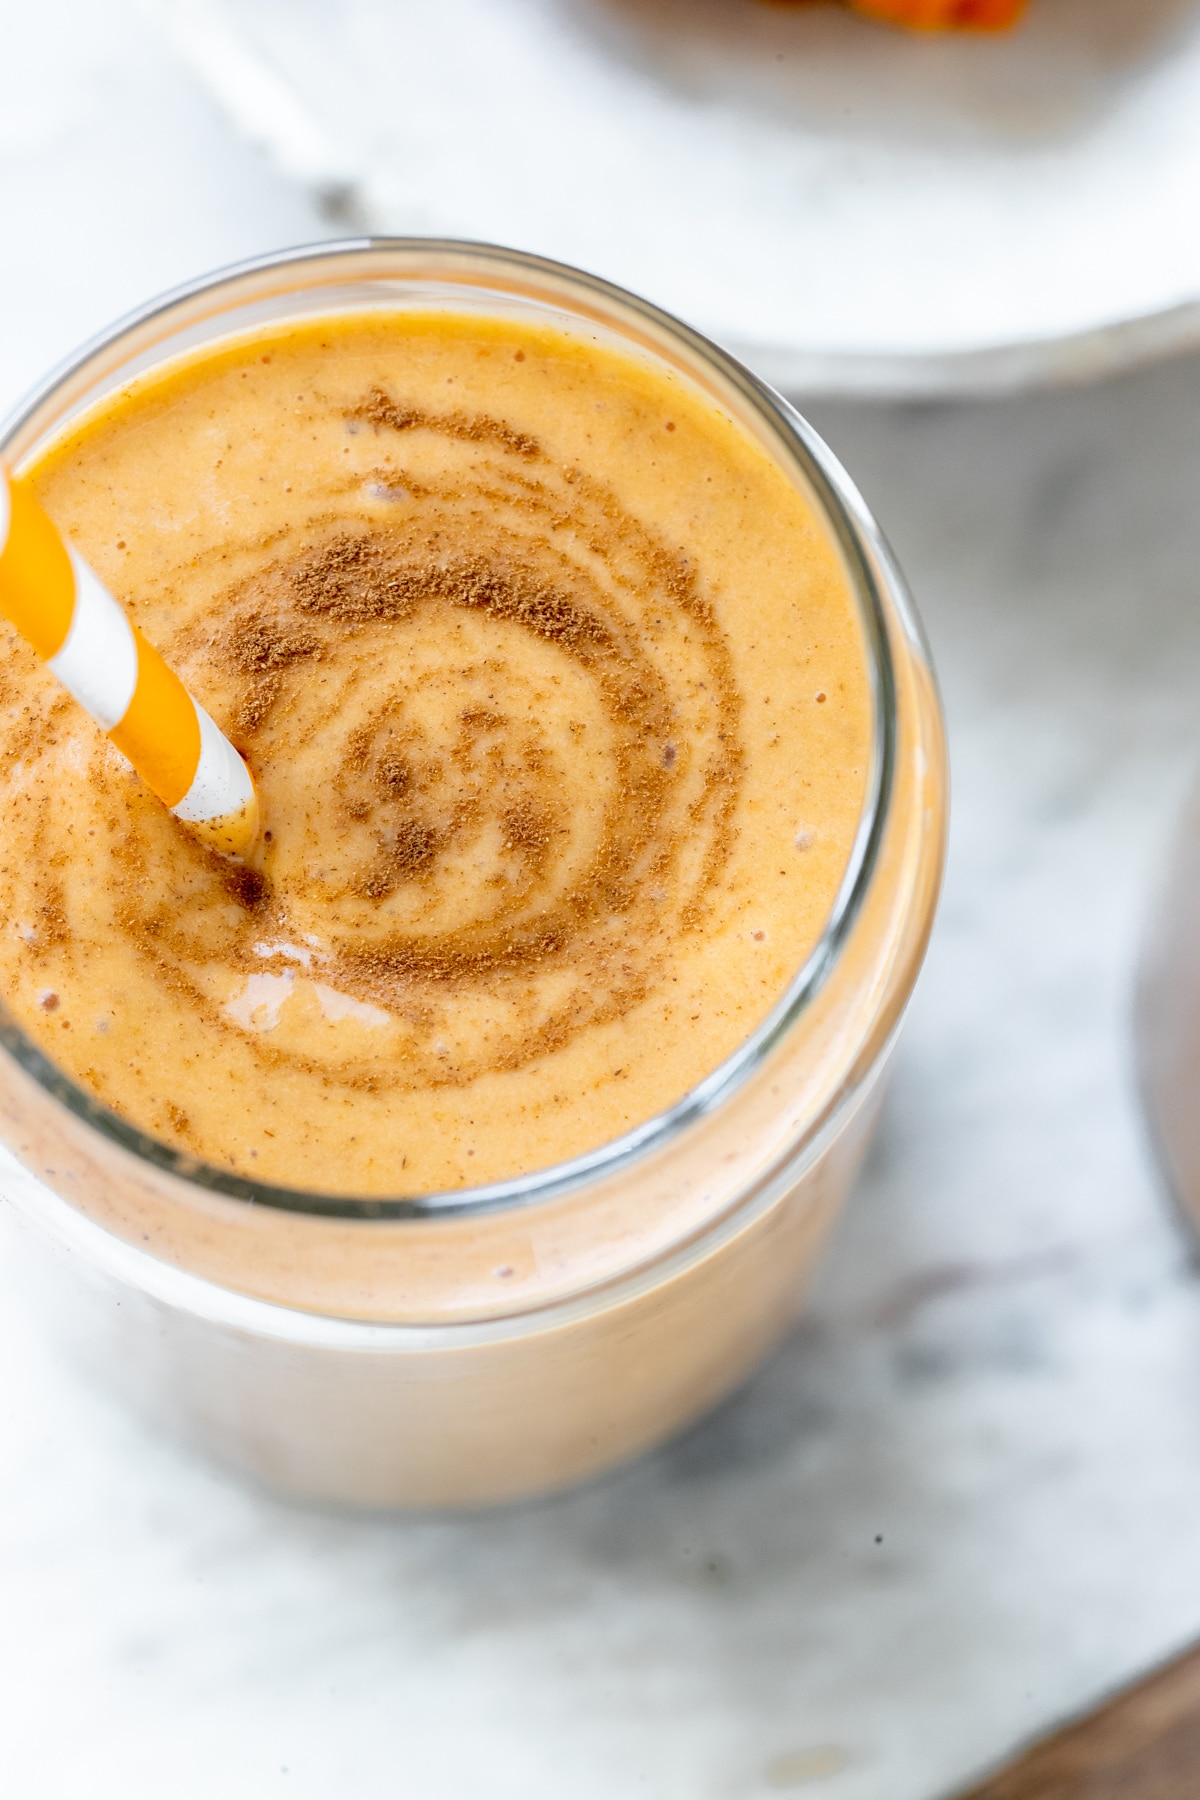 a smoothie made with pumpkin in a glass cup garnished with cinnamon and an orange straw